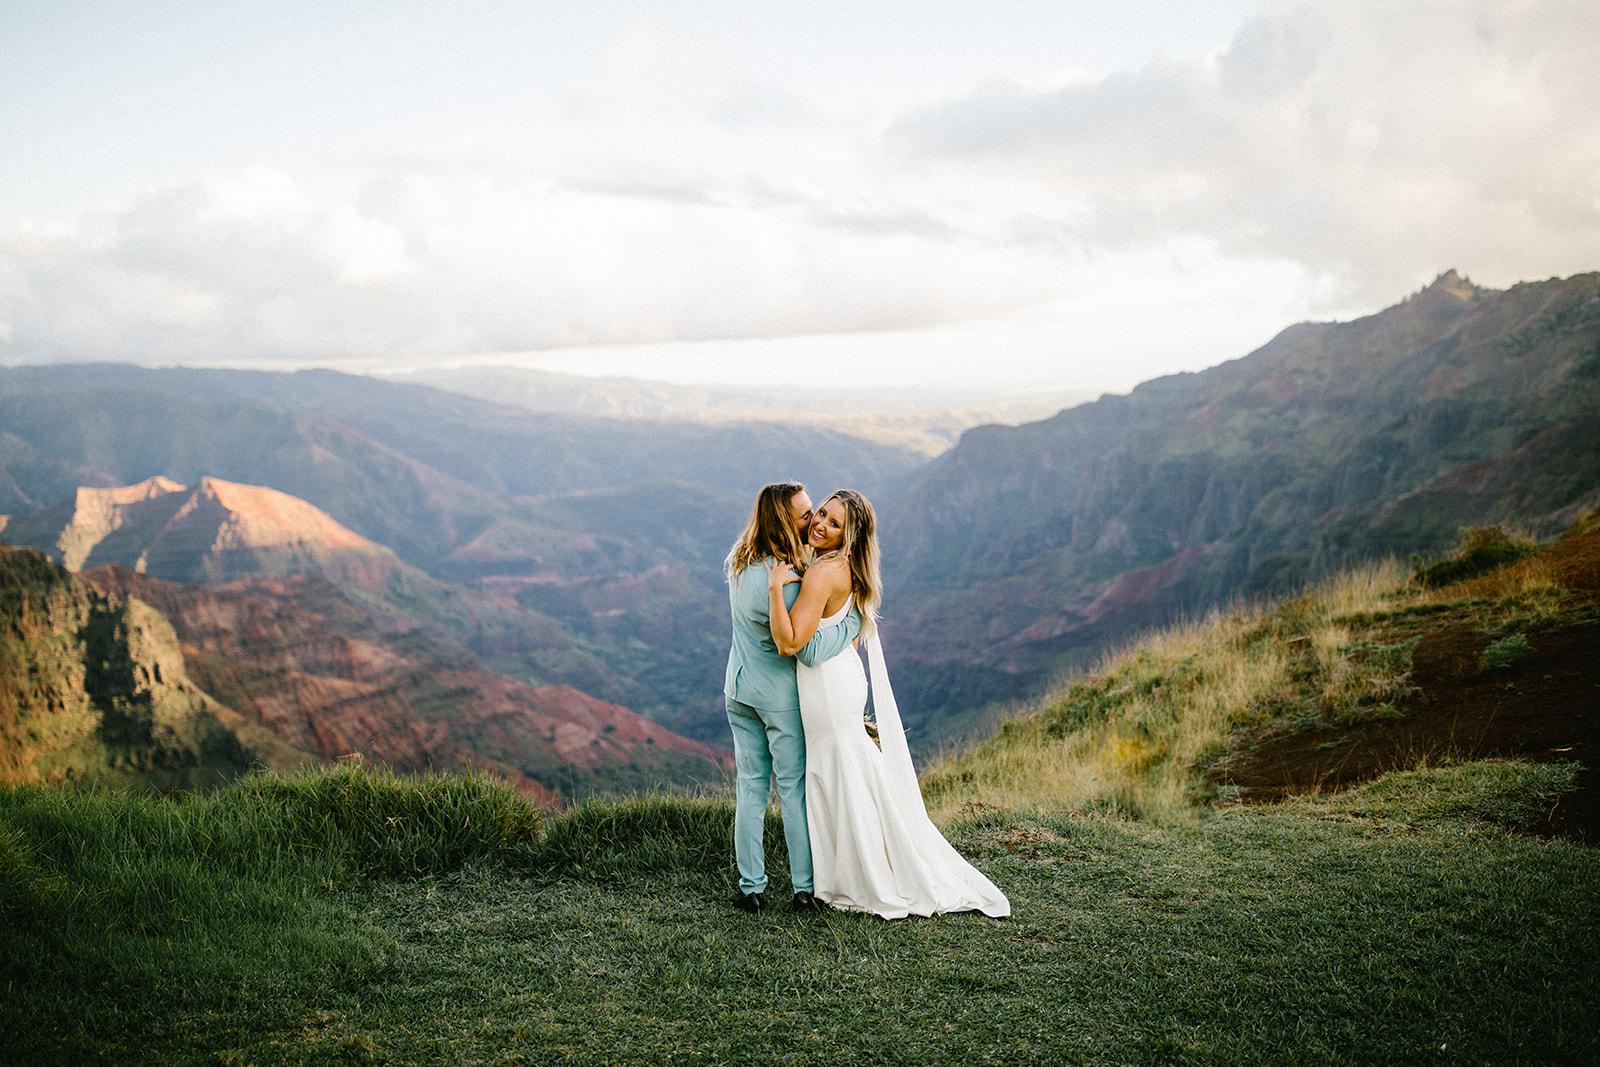 Waimea Canyon Elopement Kauai Hawaii by Mersadi Olson, Hawaii wedding, elopement and engagement photographer. This blog post includes wedding details, bridal fashion, groom fashion, bride and groom portraits, and elopement inspiration. Book your Hawaii elopement and browse the blog for inspiration #photography #weddingplanning #elopementtips #elopementphotography #elopement